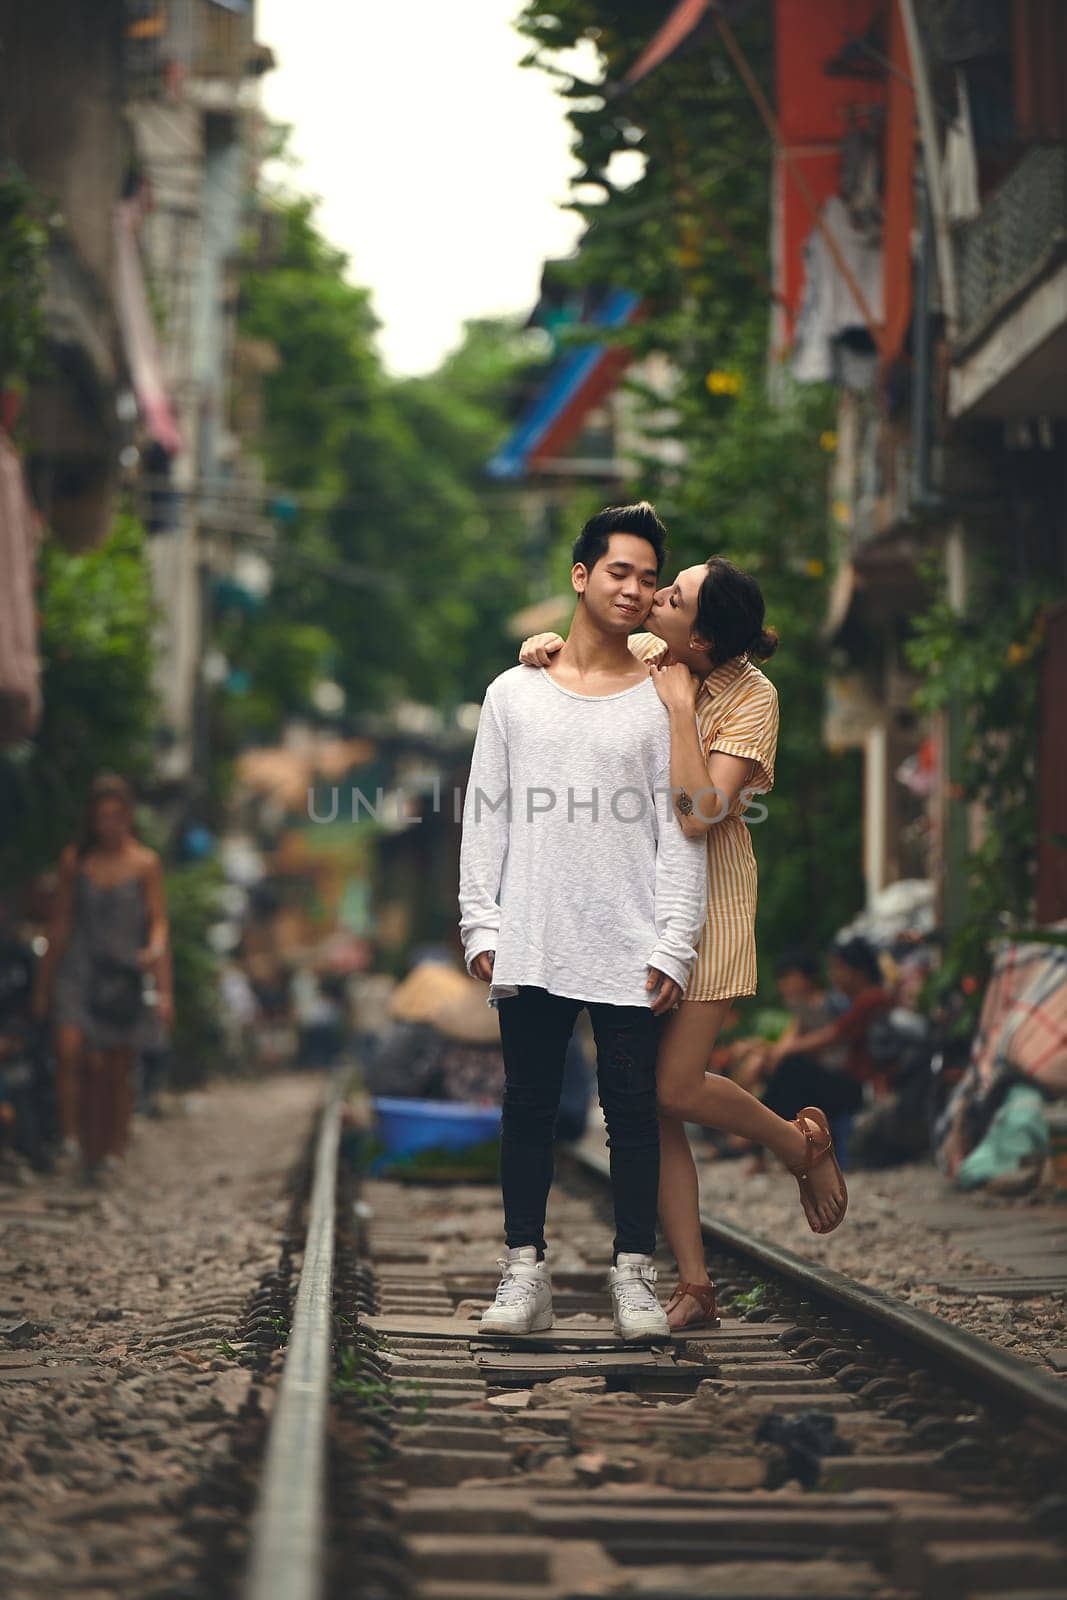 Her kisses make my heart smile. a young couple sharing a romantic moment on the train tracks in the streets of Vietnam. by YuriArcurs